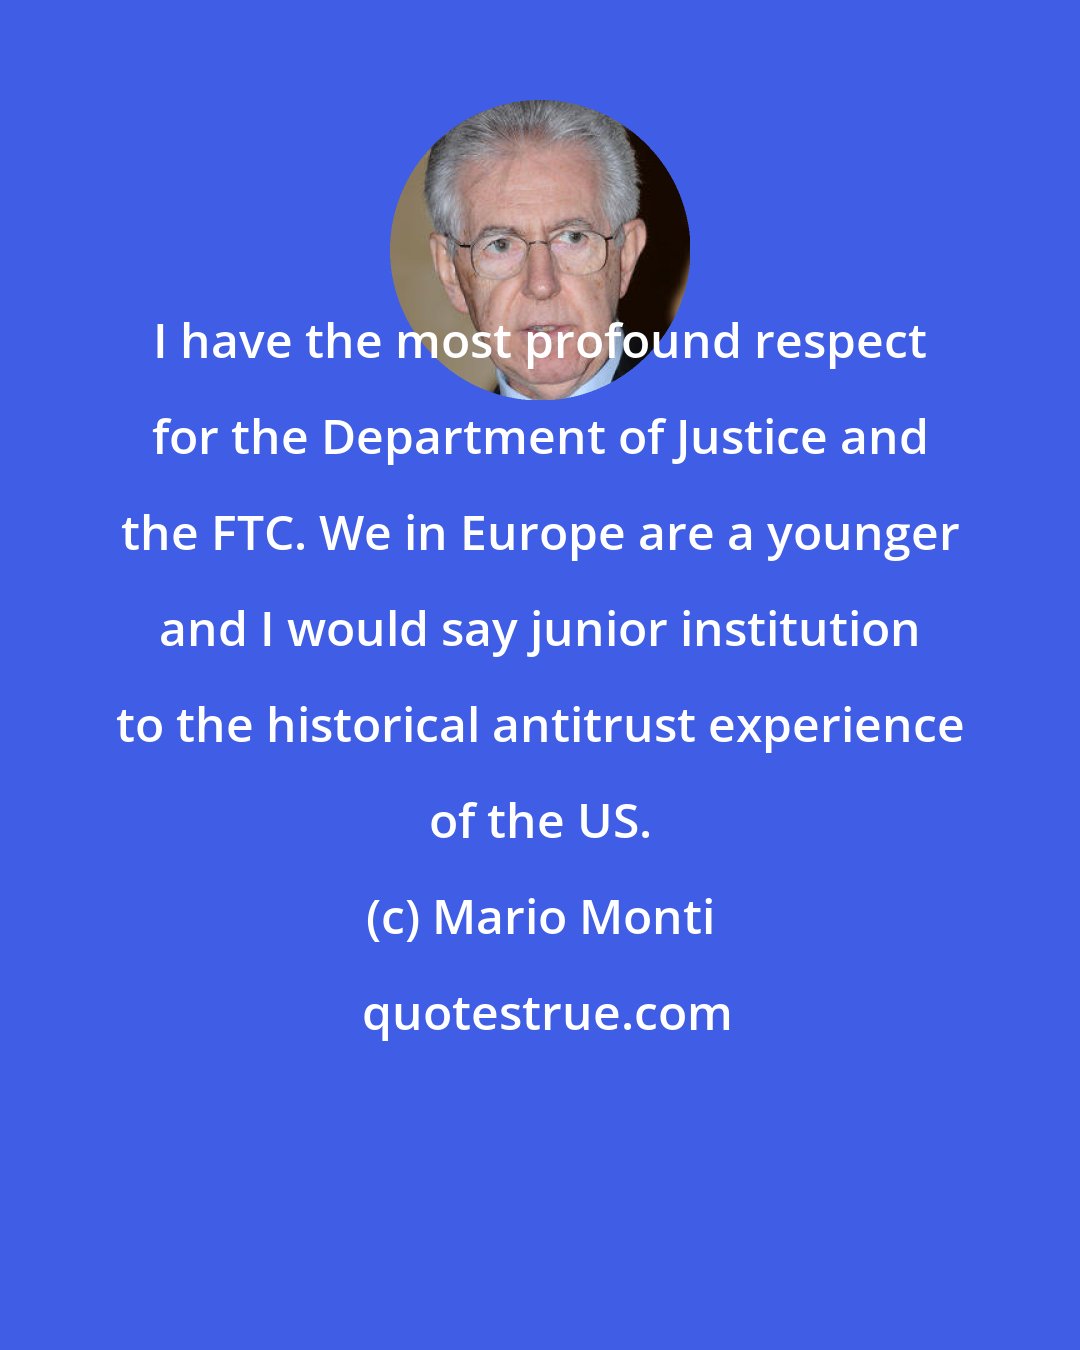 Mario Monti: I have the most profound respect for the Department of Justice and the FTC. We in Europe are a younger and I would say junior institution to the historical antitrust experience of the US.